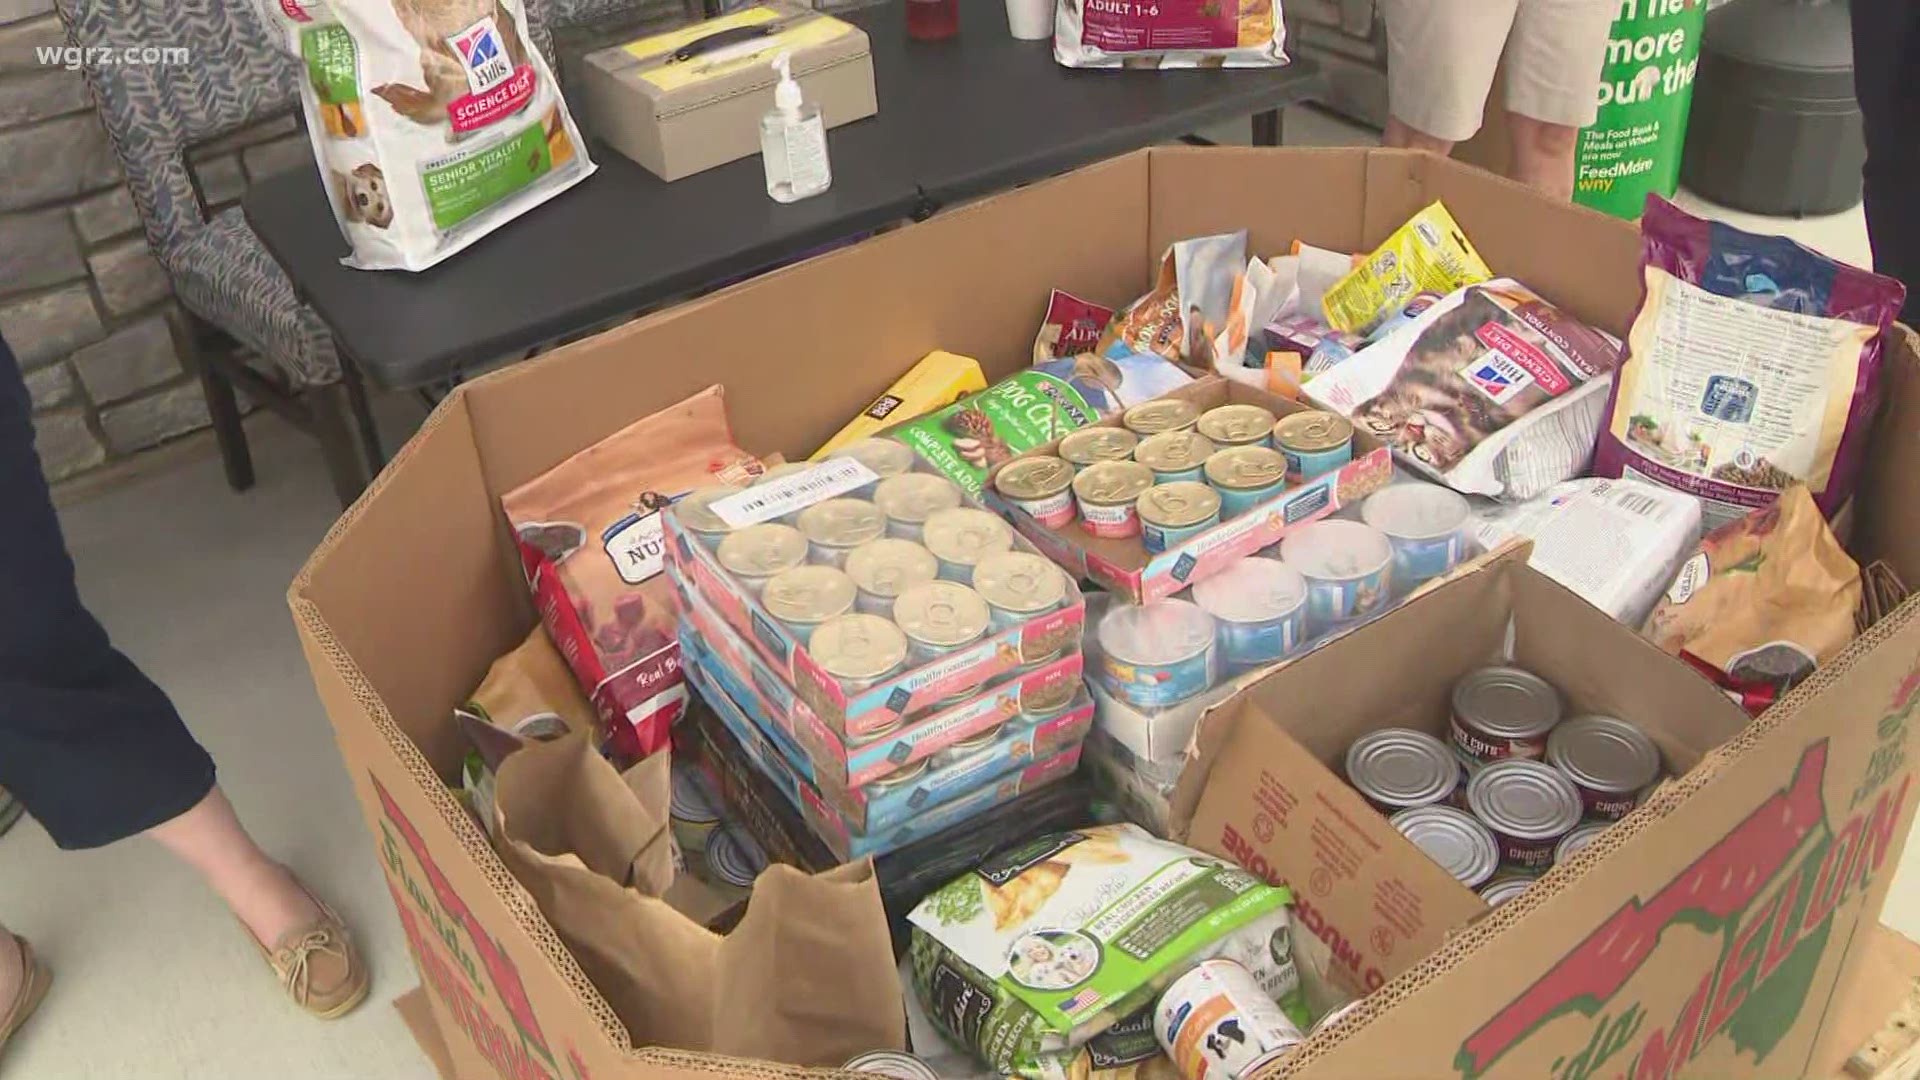 ALL YOU HAVE TO DO IS DROP-OFF SOME PET FOOD -- ALL THE DONATIONS GO TO FEED MORE WESTERN NEW YORK'S ANI-MEALS PROGRAM.